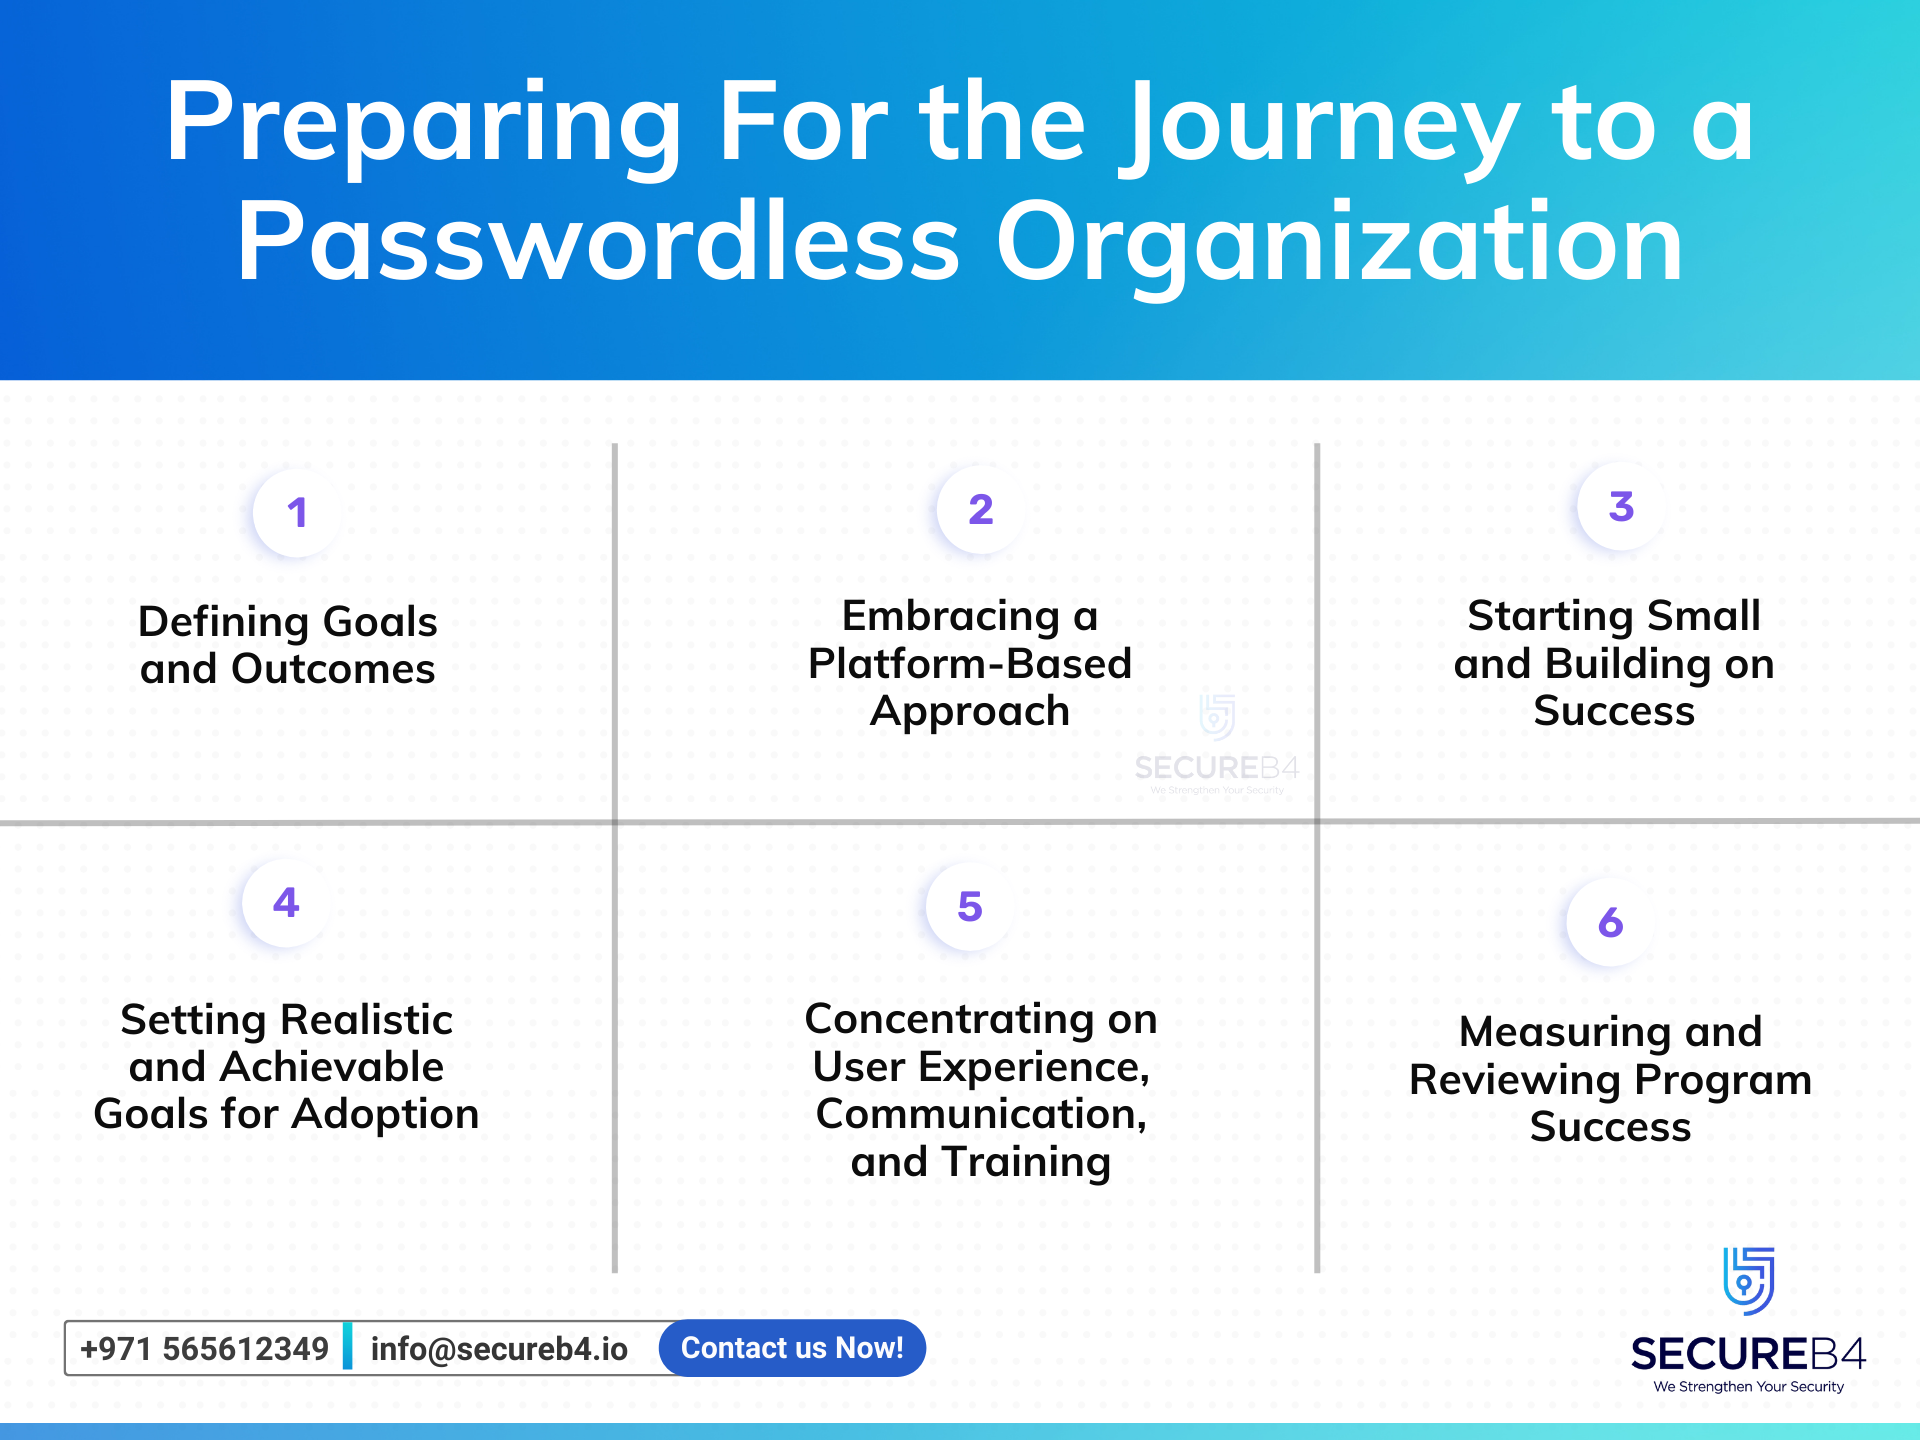 Preparing for the Journey to a Passwordless Organization: A Comprehensive Guide for C-Level Executives and Top Management